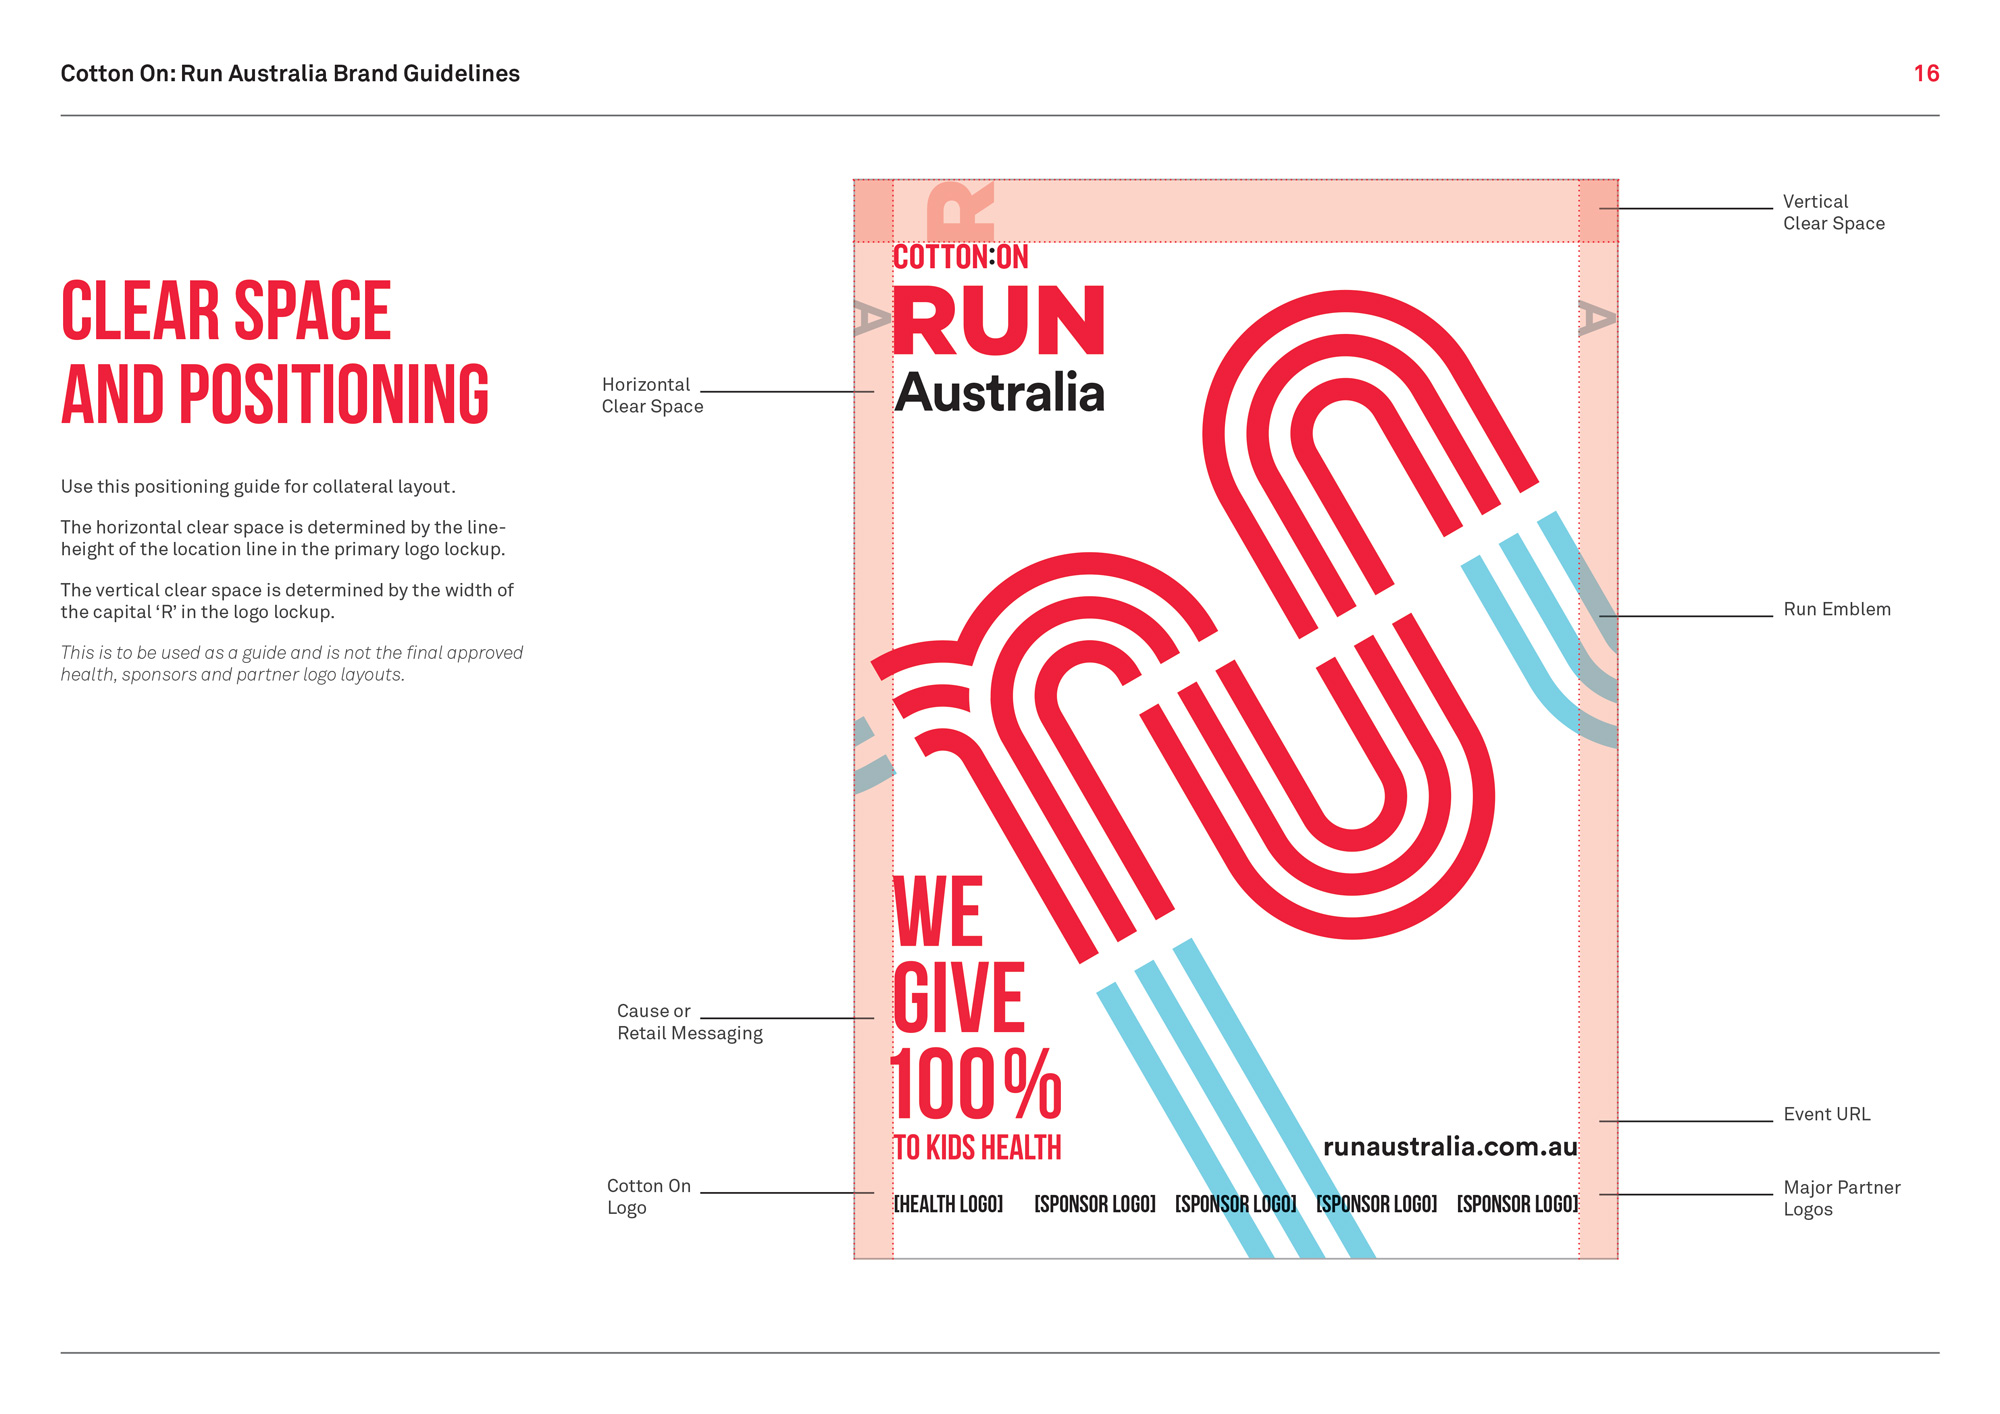 Poster layout brand guidelines for Cotton On's Run Australia.